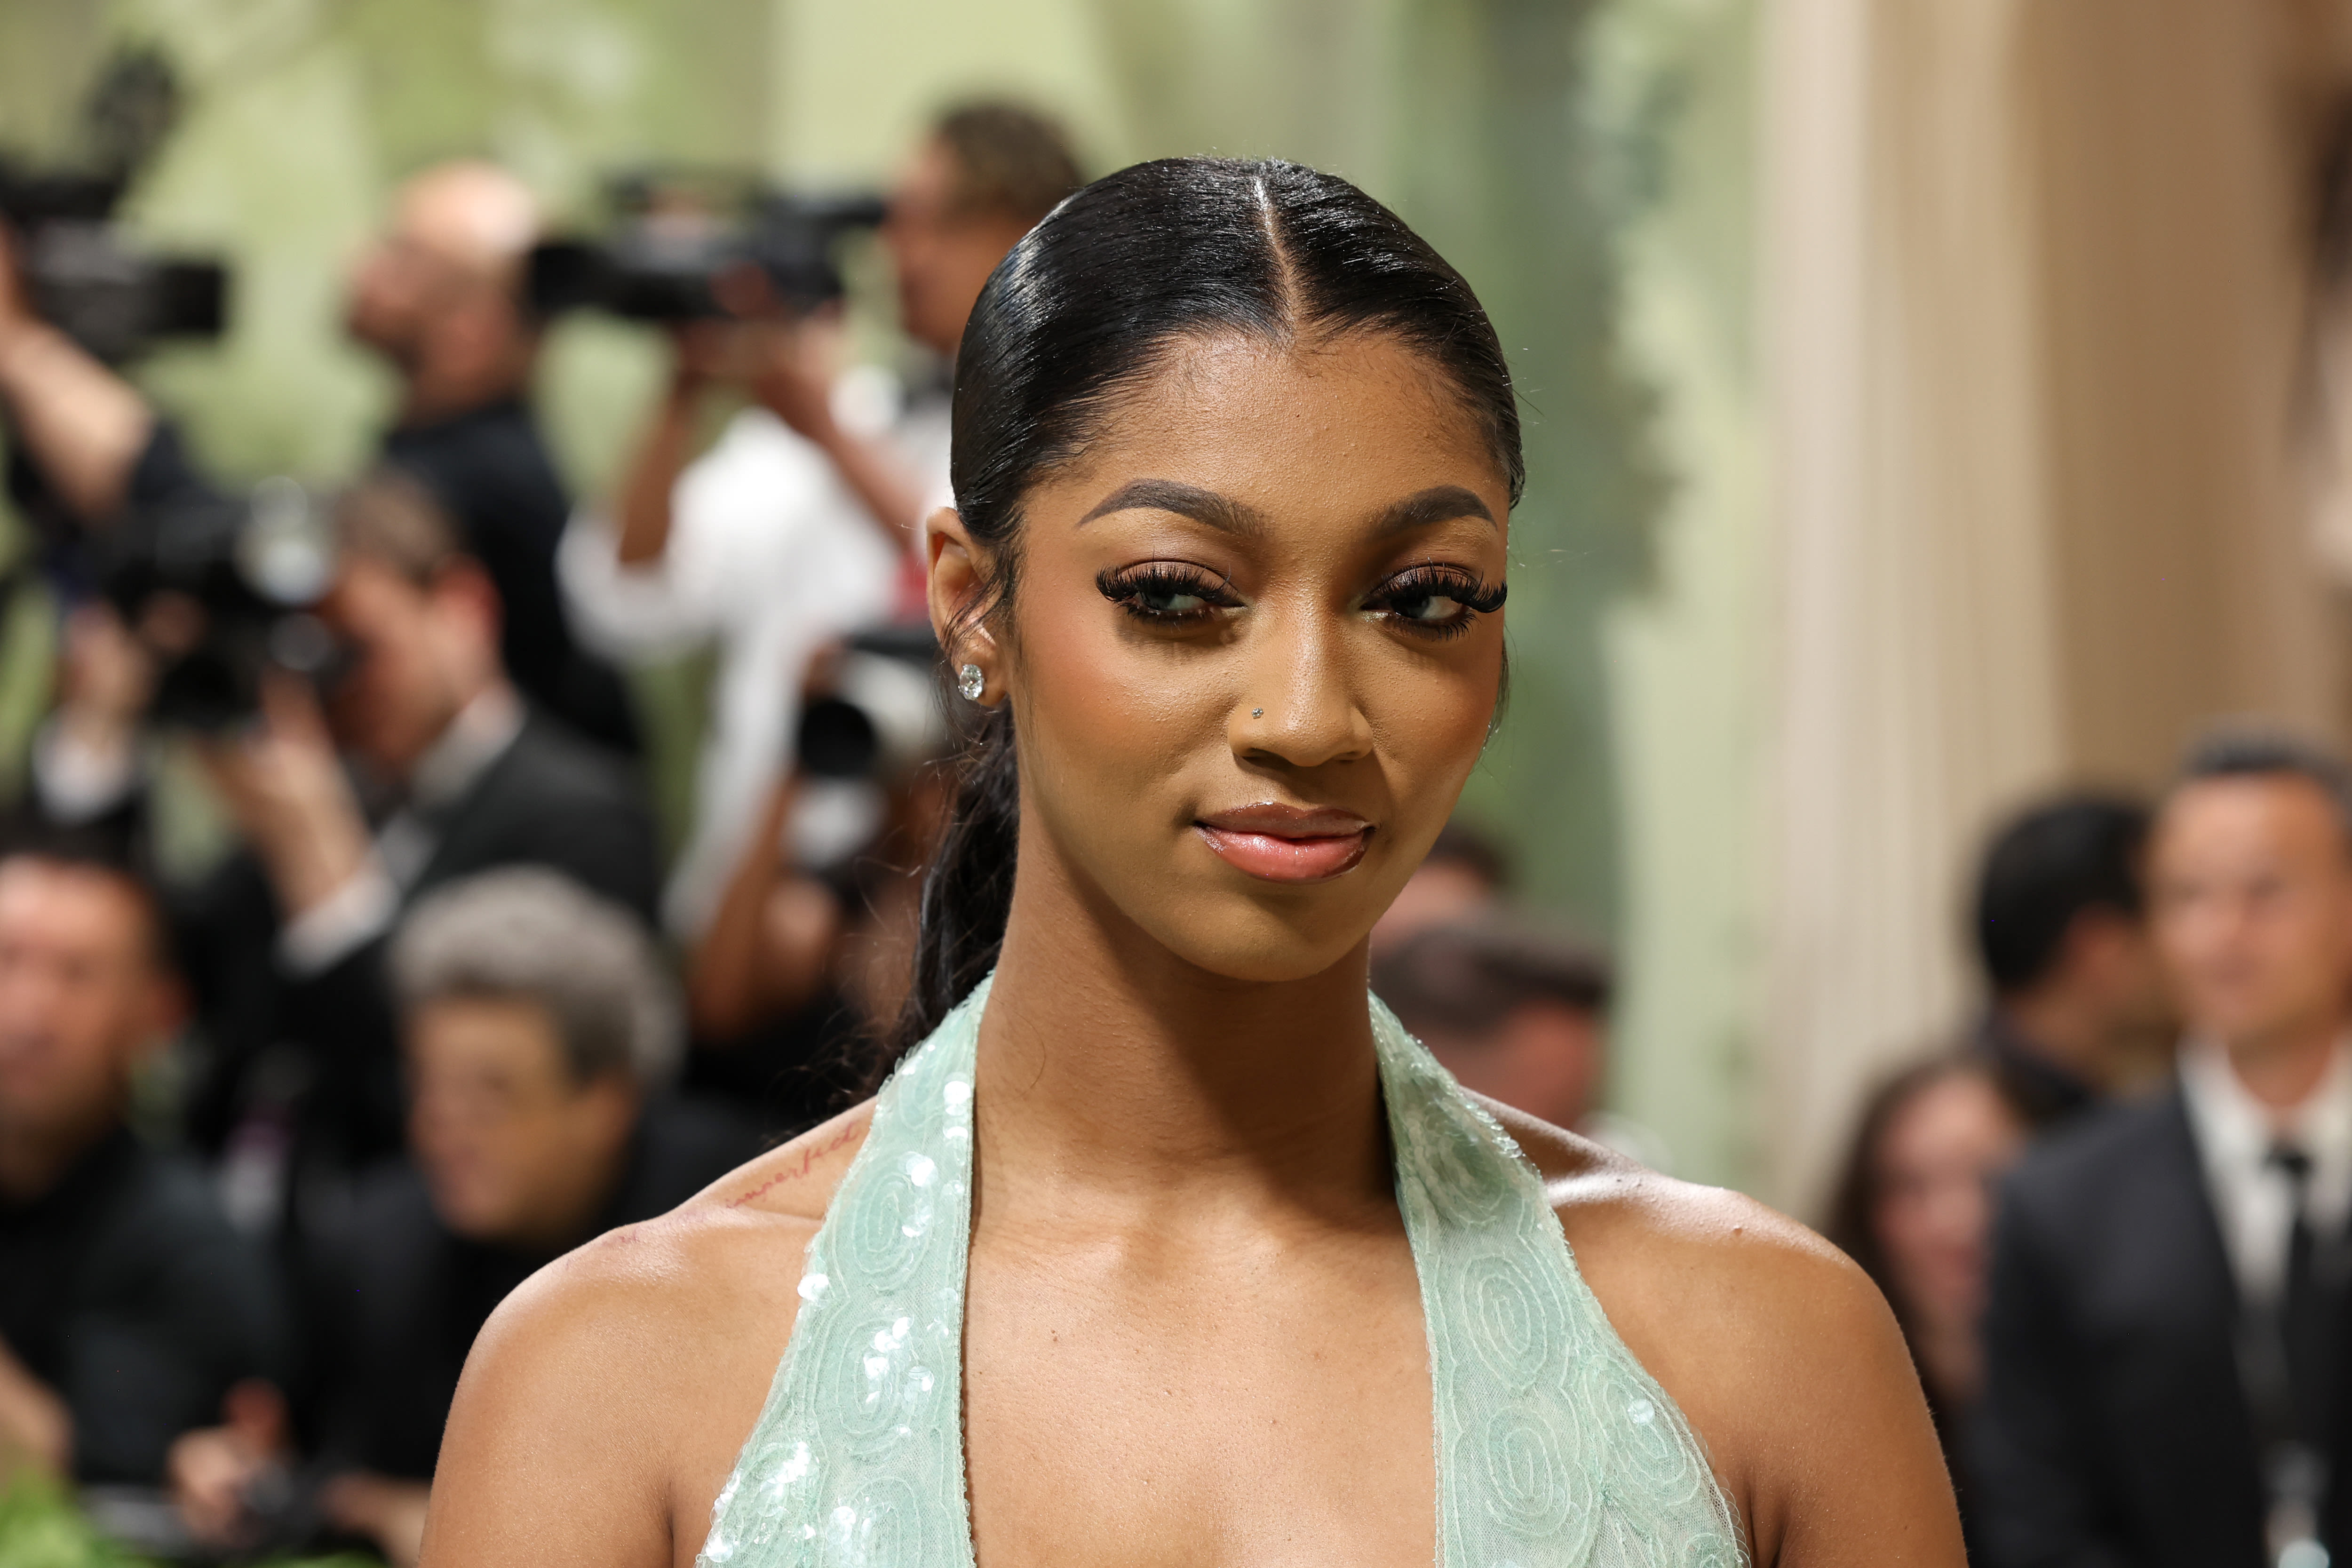 Angel Reese stuns in sexy Met Gala gown just hours after Chicago Sky practice